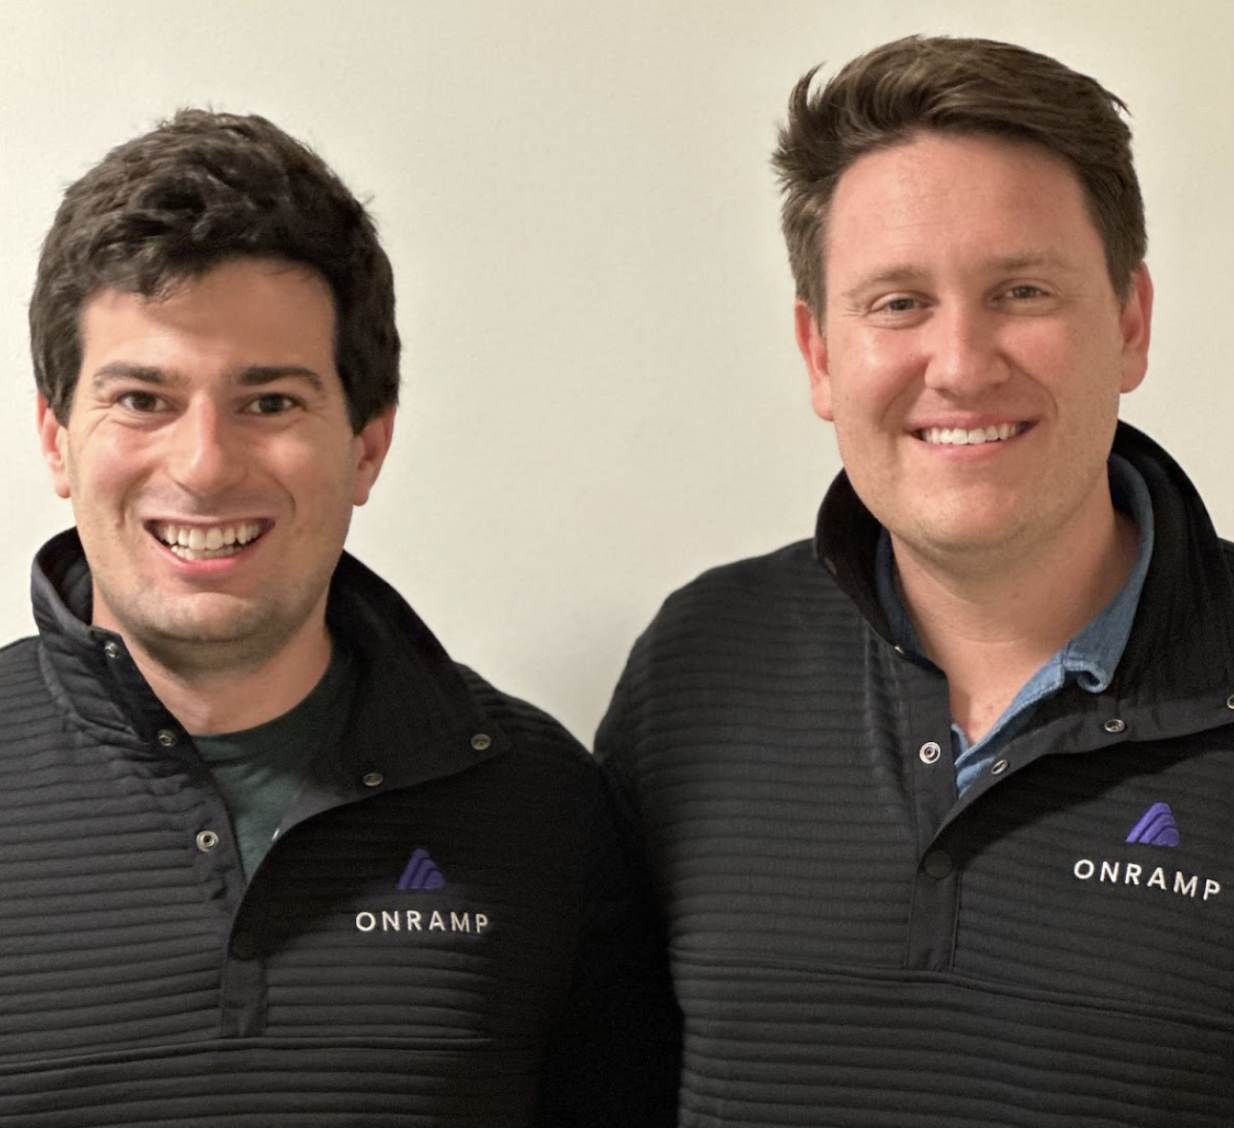 OnRamp announces $14.2M in funding to automate B2B customer onboarding